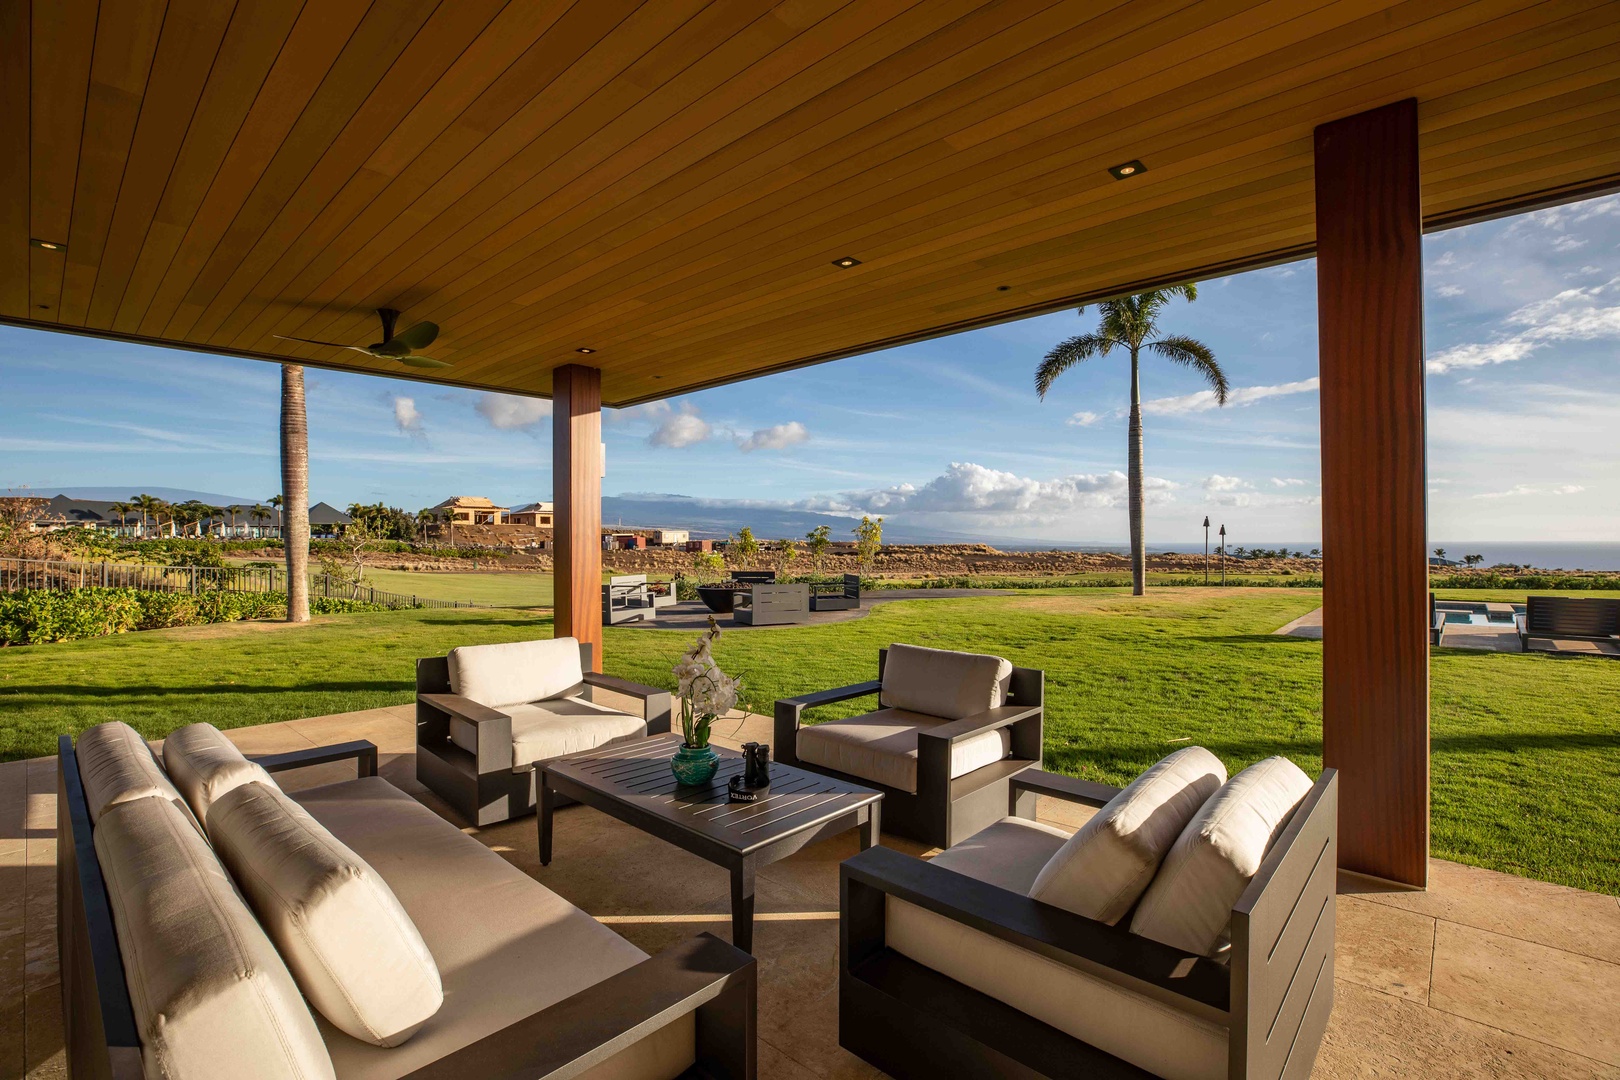 Kamuela Vacation Rentals, Hapuna Estates #8 - Enjoy reading a book, playing a game of cards or just relaxing at one of the many lanai seating areas